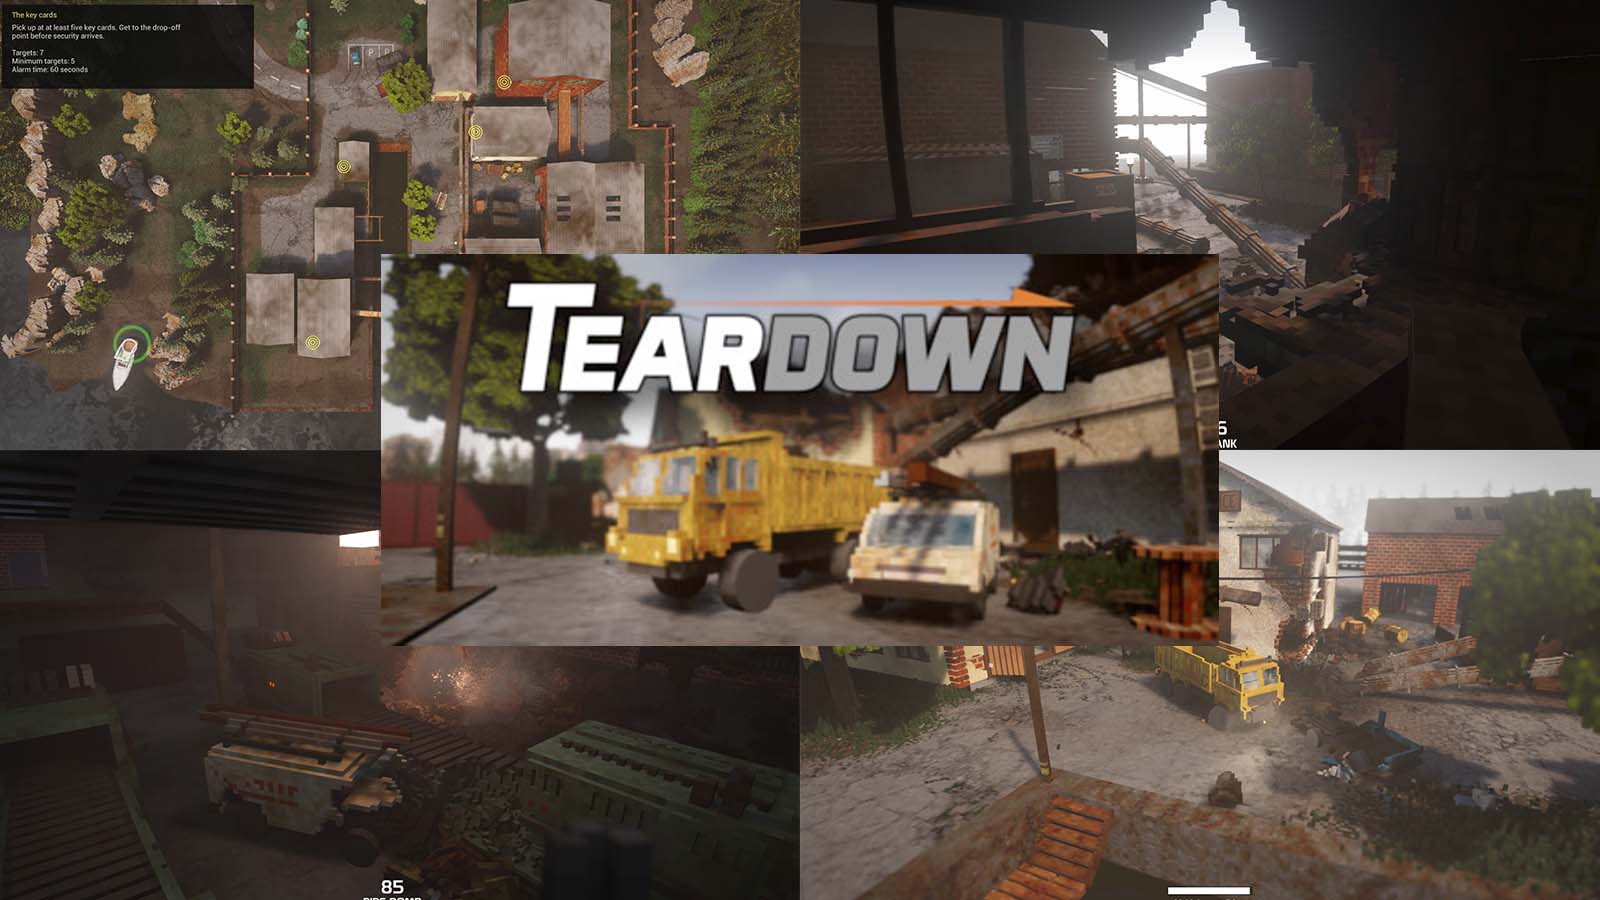 Teardown: Finally a Game That Lives Up to Its Name